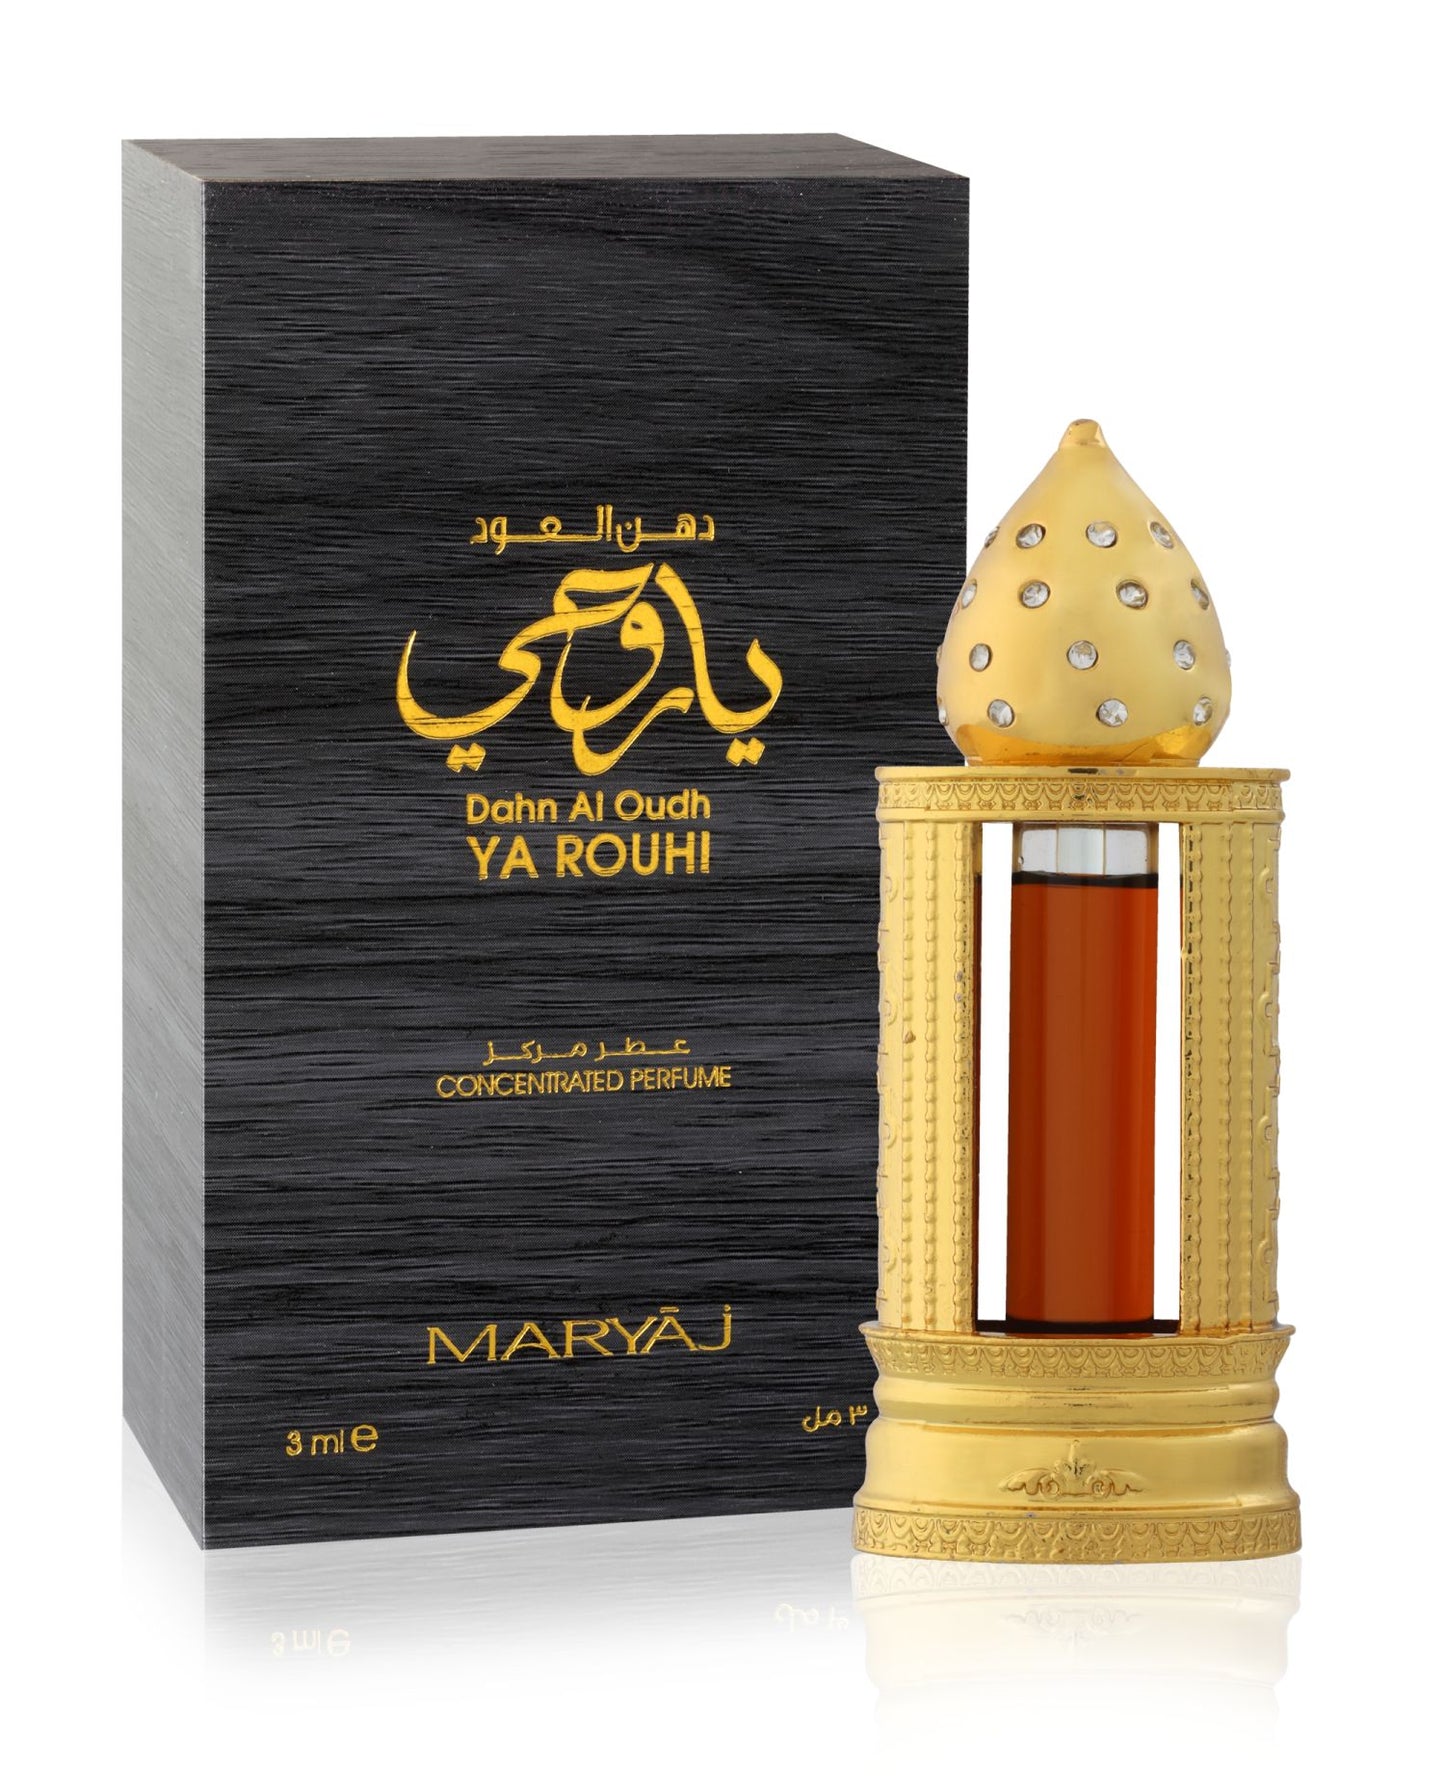 DHAN AL OUD YA ROUHI Concentrated Perfume Oil Combo For Men, 3 ml (Pack of 3)